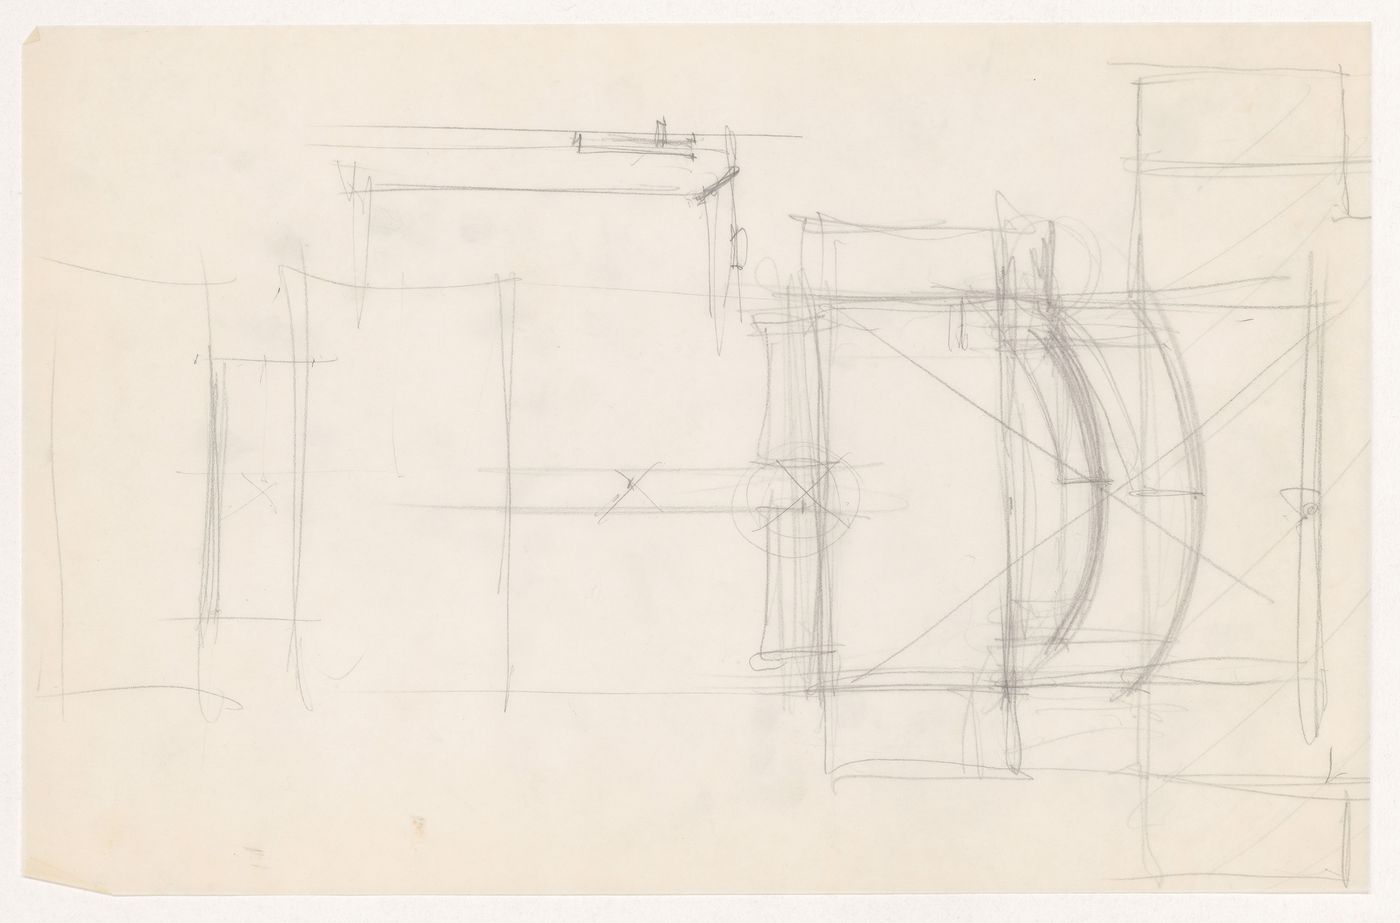 Sketch sectional detail, possibly for a resonator for the Metallurgy Building, Illinois Institute of Technology, Chicago